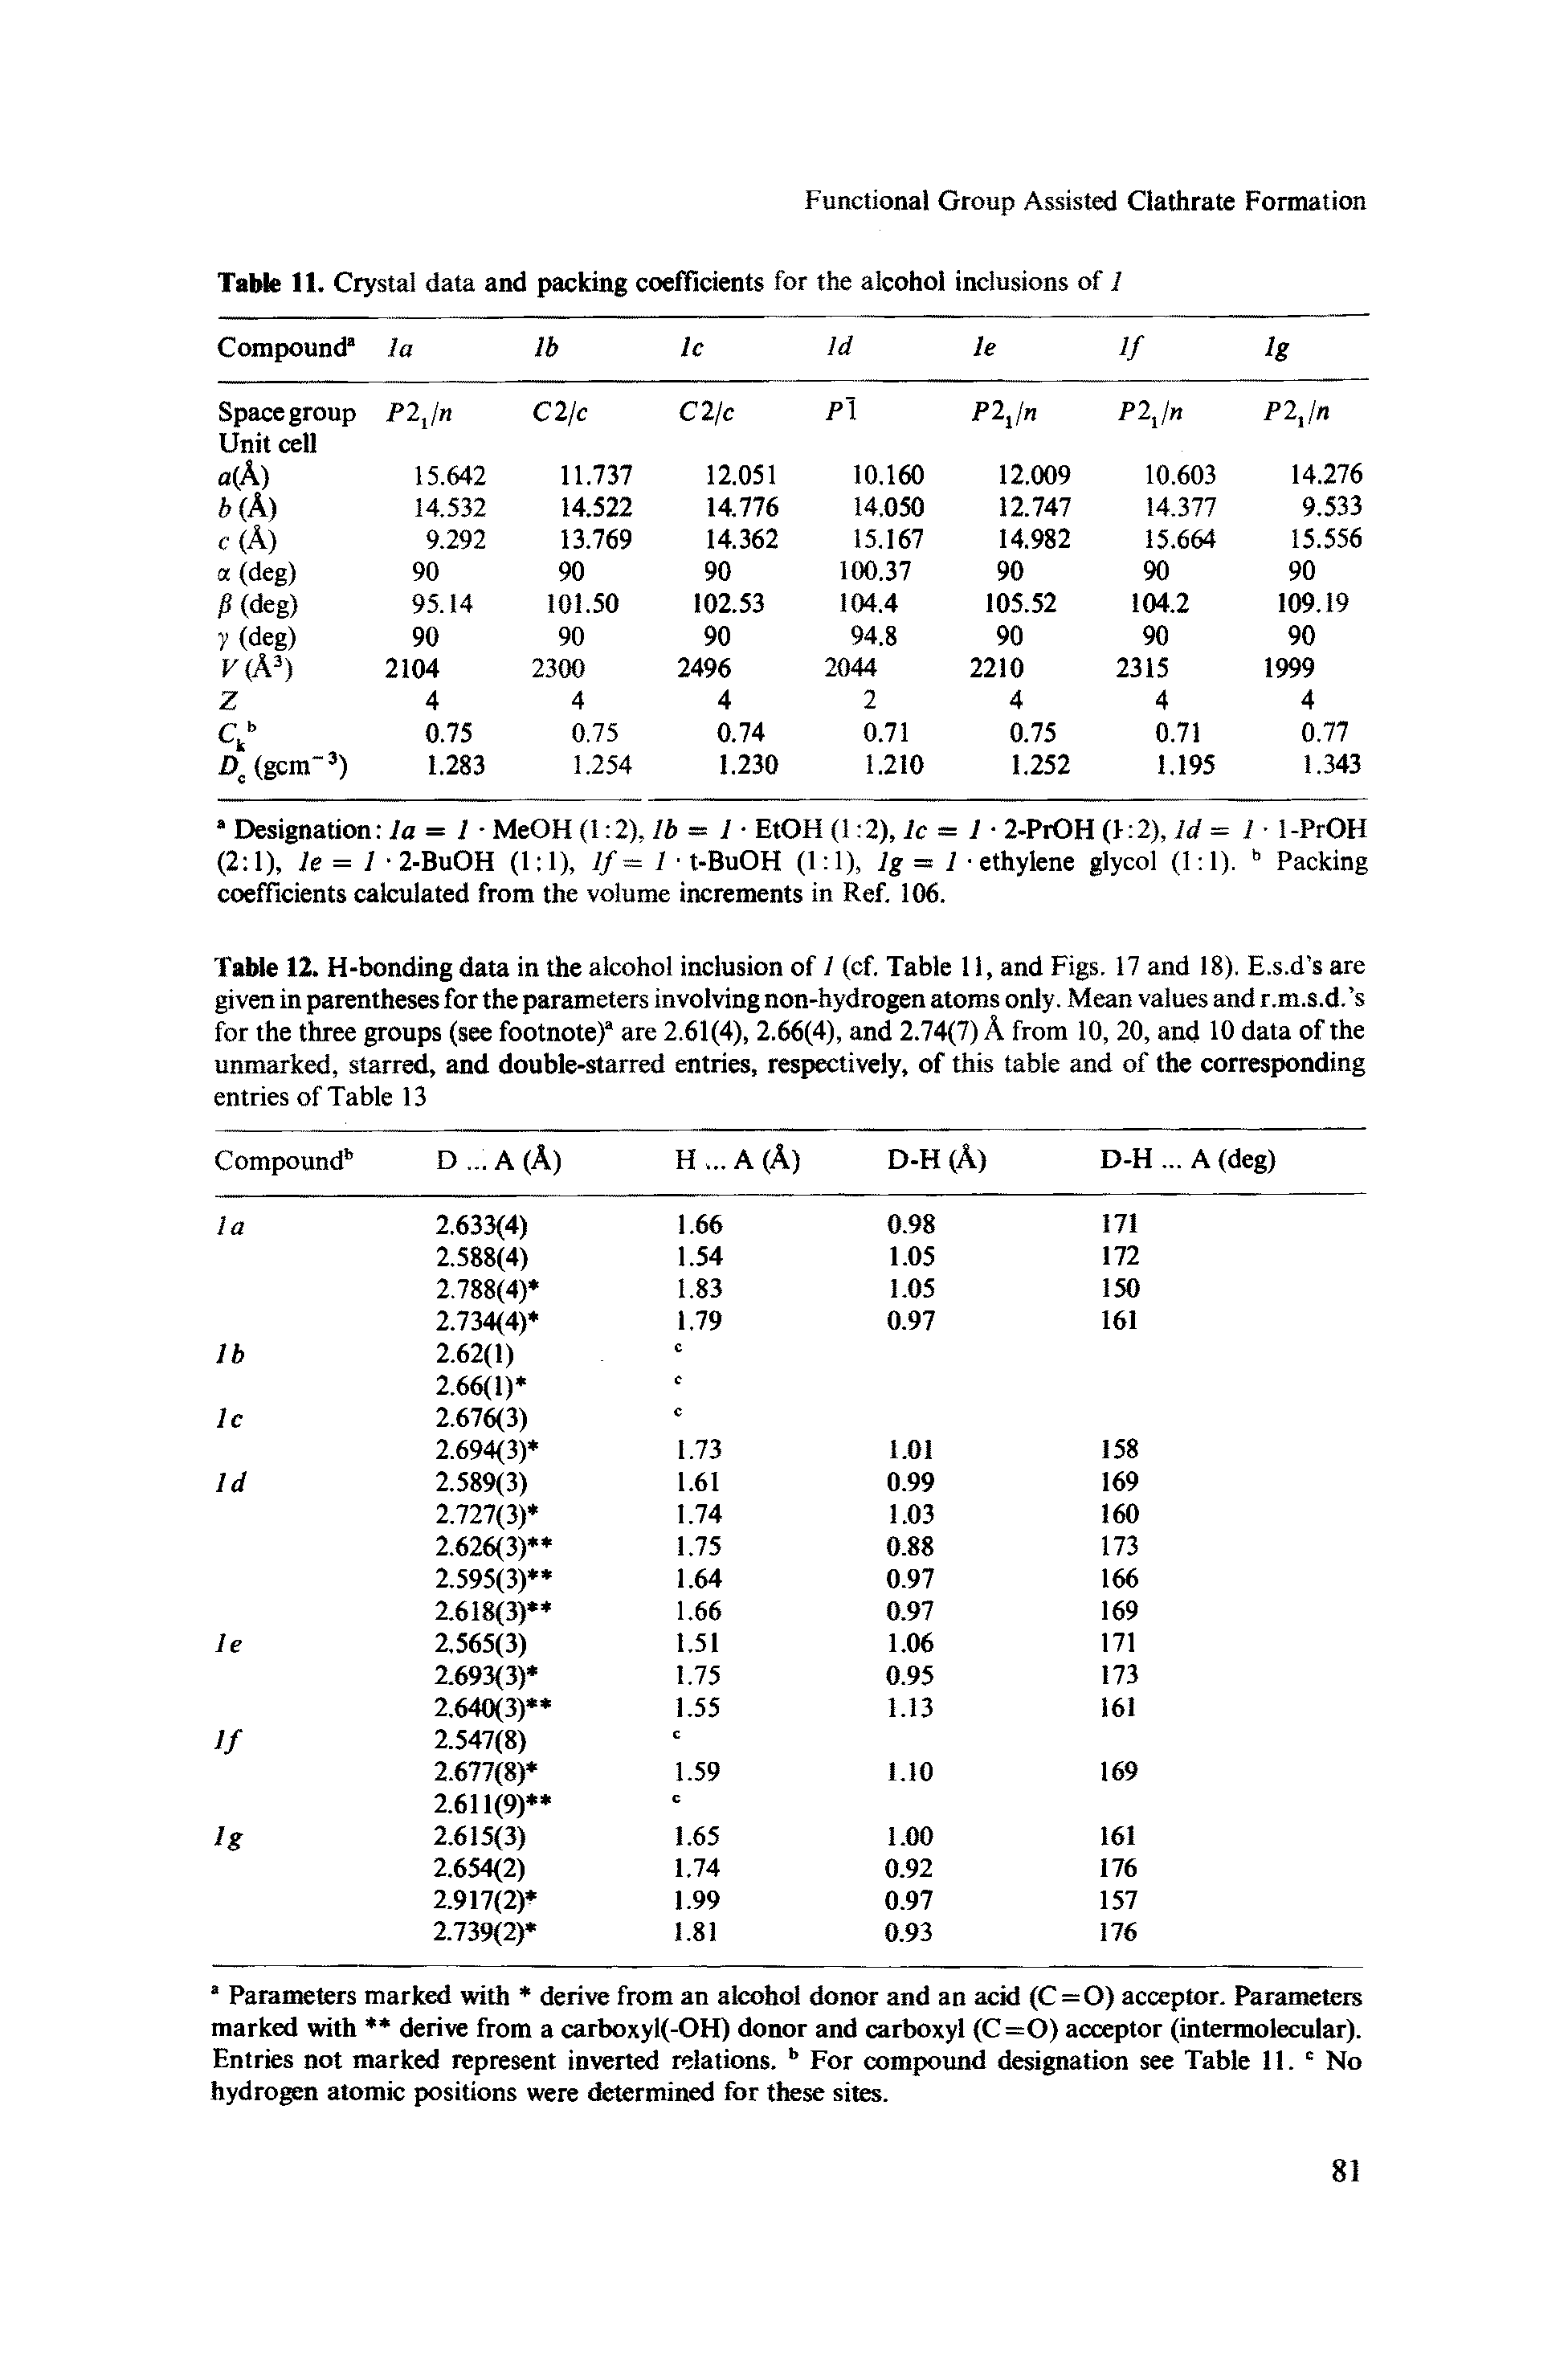 Table 12. H-bonding data in the alcohol inclusion of 1 (cf. Table 11, and Figs. 17 and 18). E.s.d s are given in parentheses for the parameters involving non-hydrogen atoms only. Mean values and r.m.s.d. s for the three groups (see footnote)3 are 2.61(4), 2.66(4), and 2.74(7) A from 10, 20, and 10 data of the unmarked, starred, and double-starred entries, respectively, of this table and of the corresponding entries of Table 13...